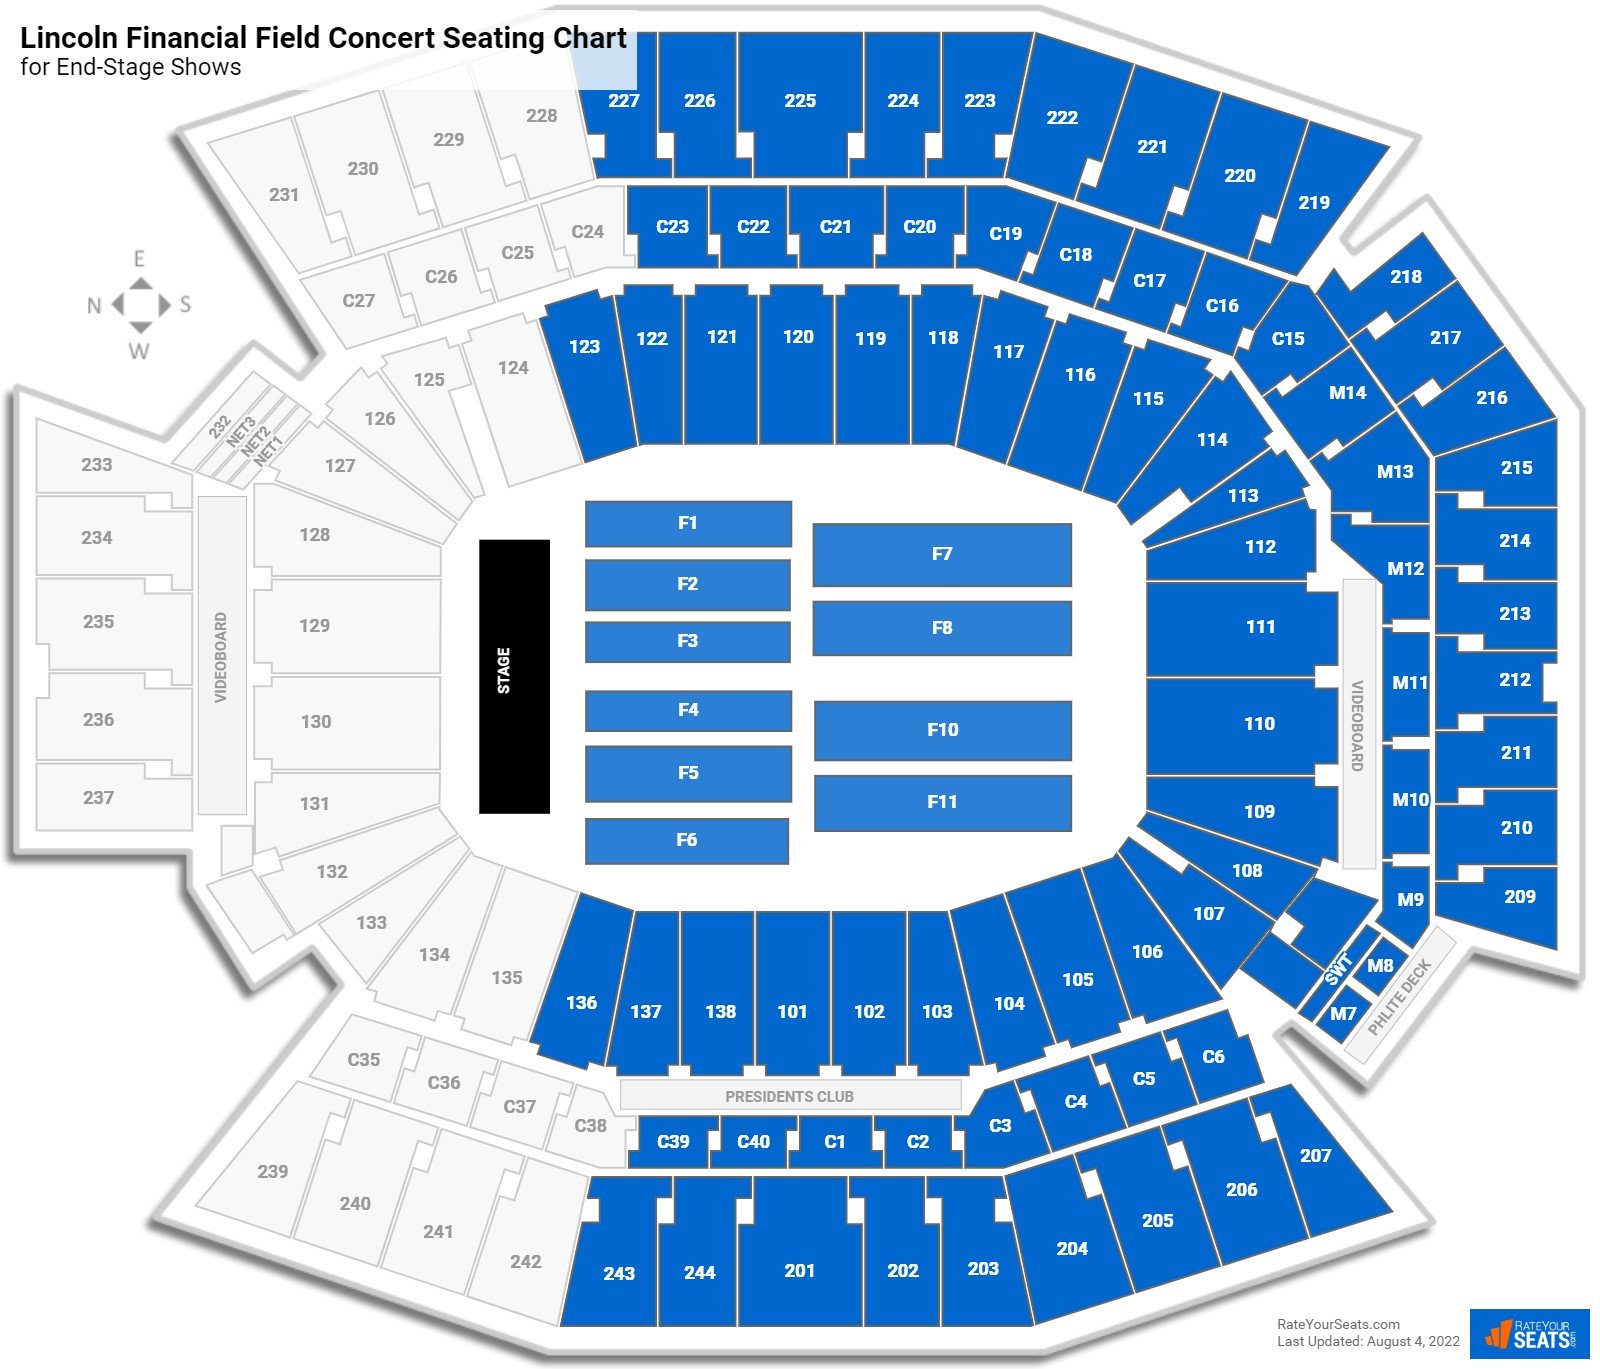 Lincoln Financial Field Seating Charts 